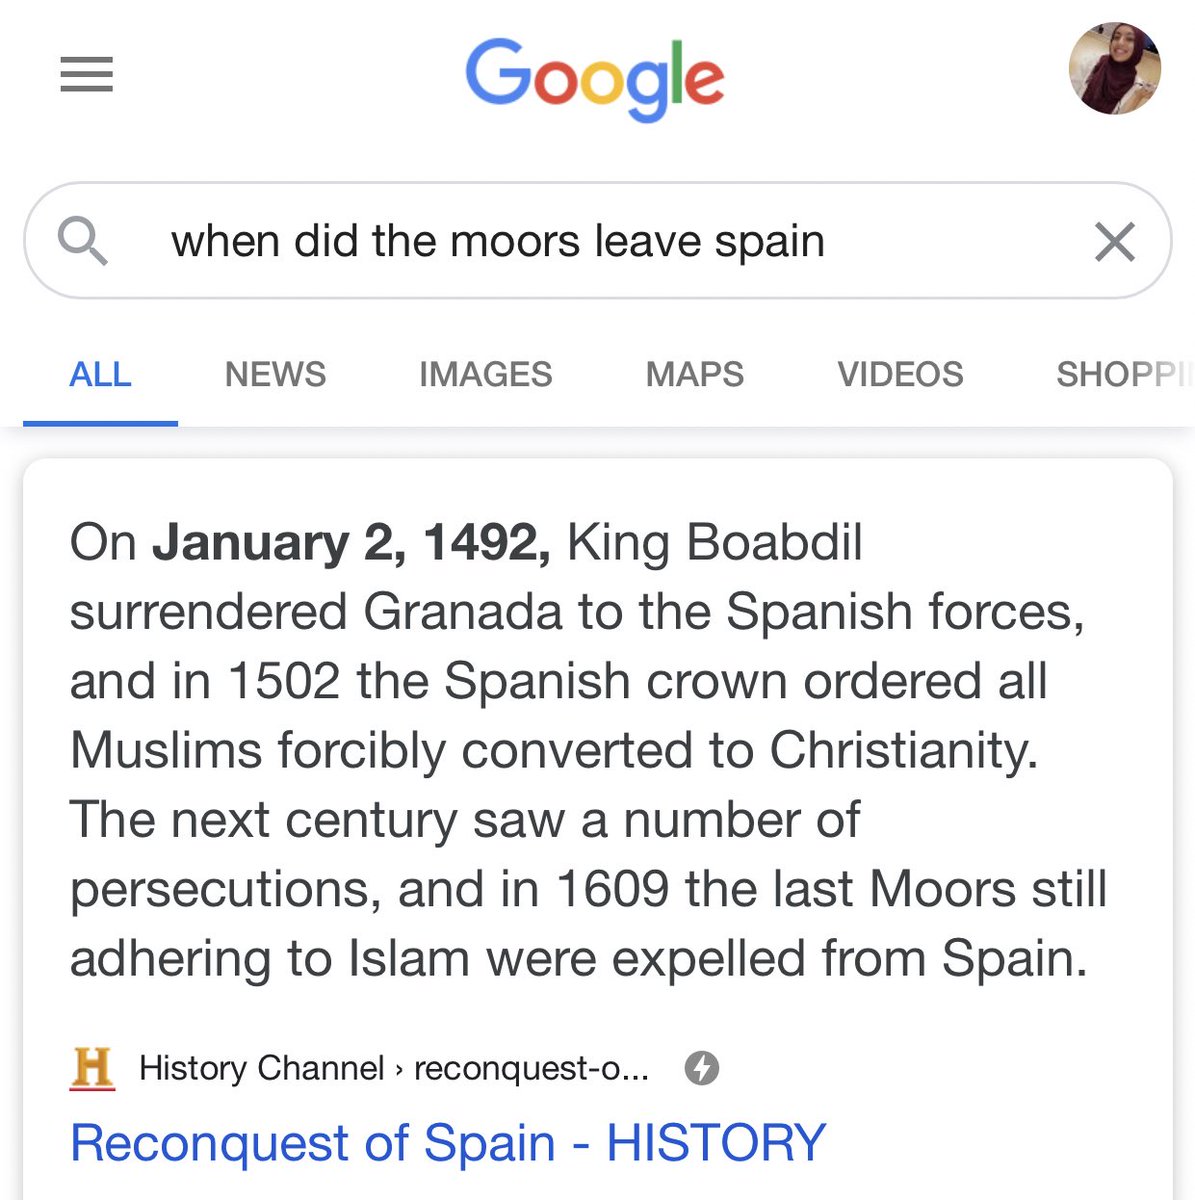 as i said earlier the moors ruled spain for many years, in those years they allowed jews and christians to practice freely. it wasn’t until the expulsion of the moors where moors were forced to convert. this is just extra random info